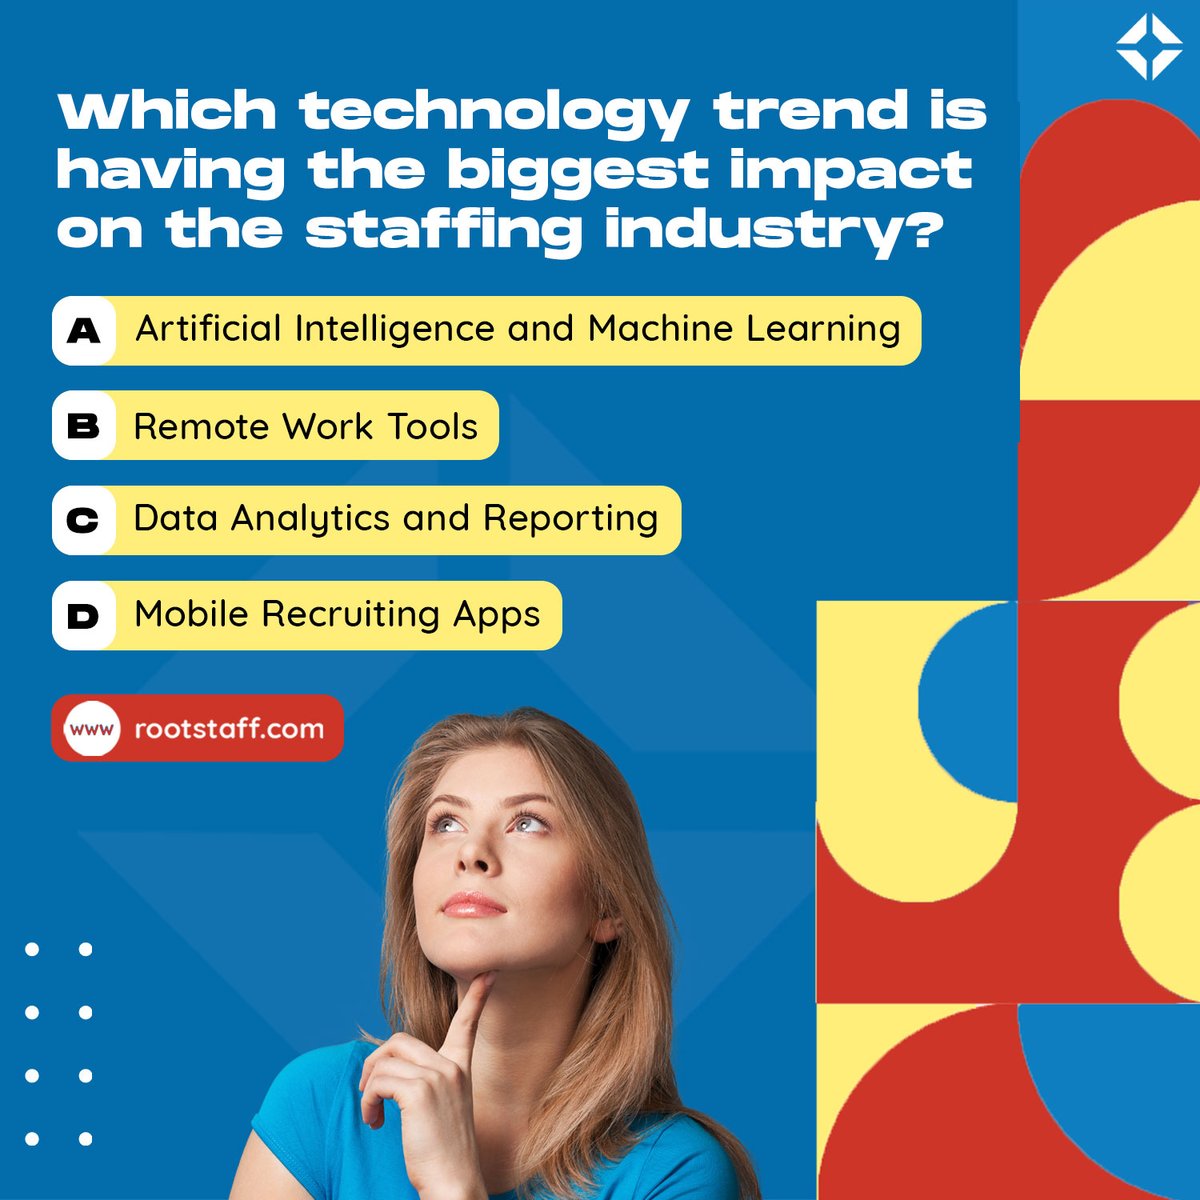 Tech is reshaping the staffing game!
What tech trend do you think is making the most waves in the staffing industry right now?

#linkedinpoll #poll #staffing #recruiting #AI #machinelearning #staffingindustry #remotework #workforce #rootstaff #usrecruitment #hiring